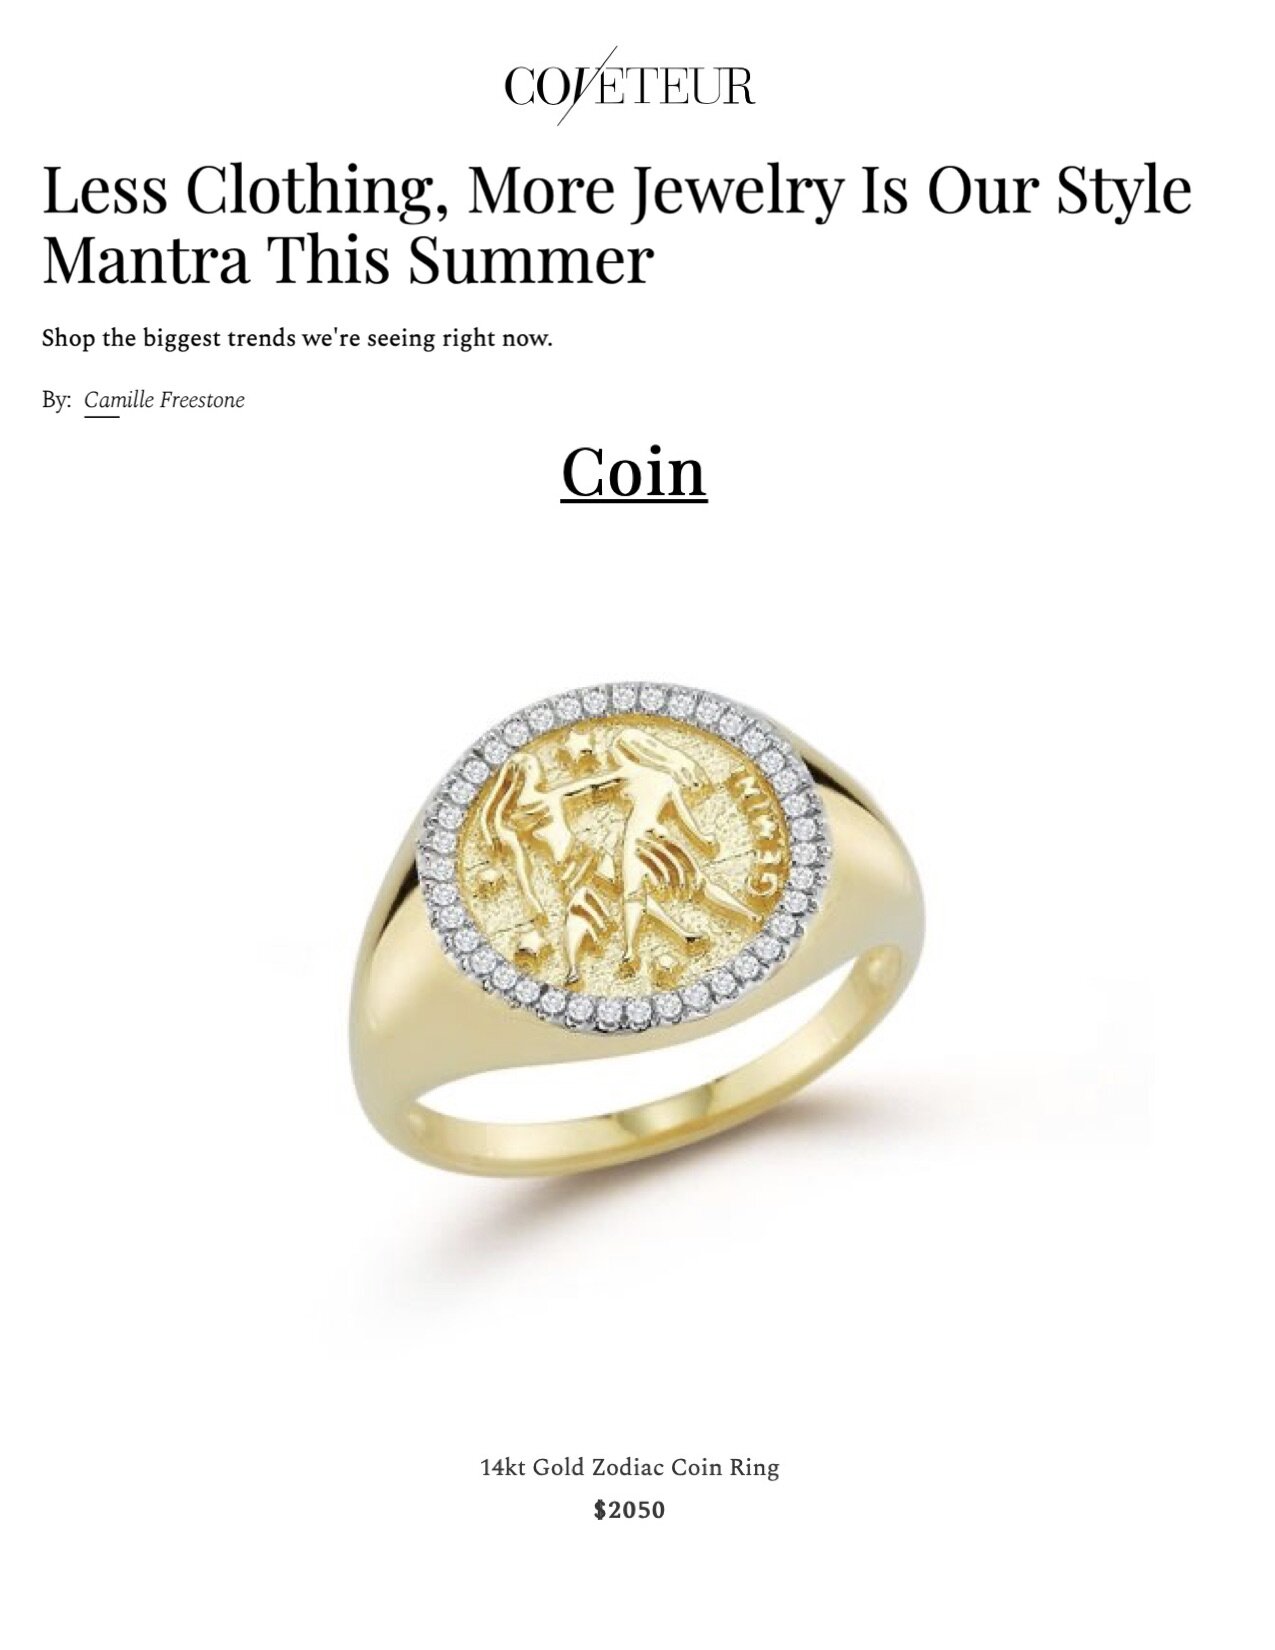 MATEO on Coveteur.com, May 2021